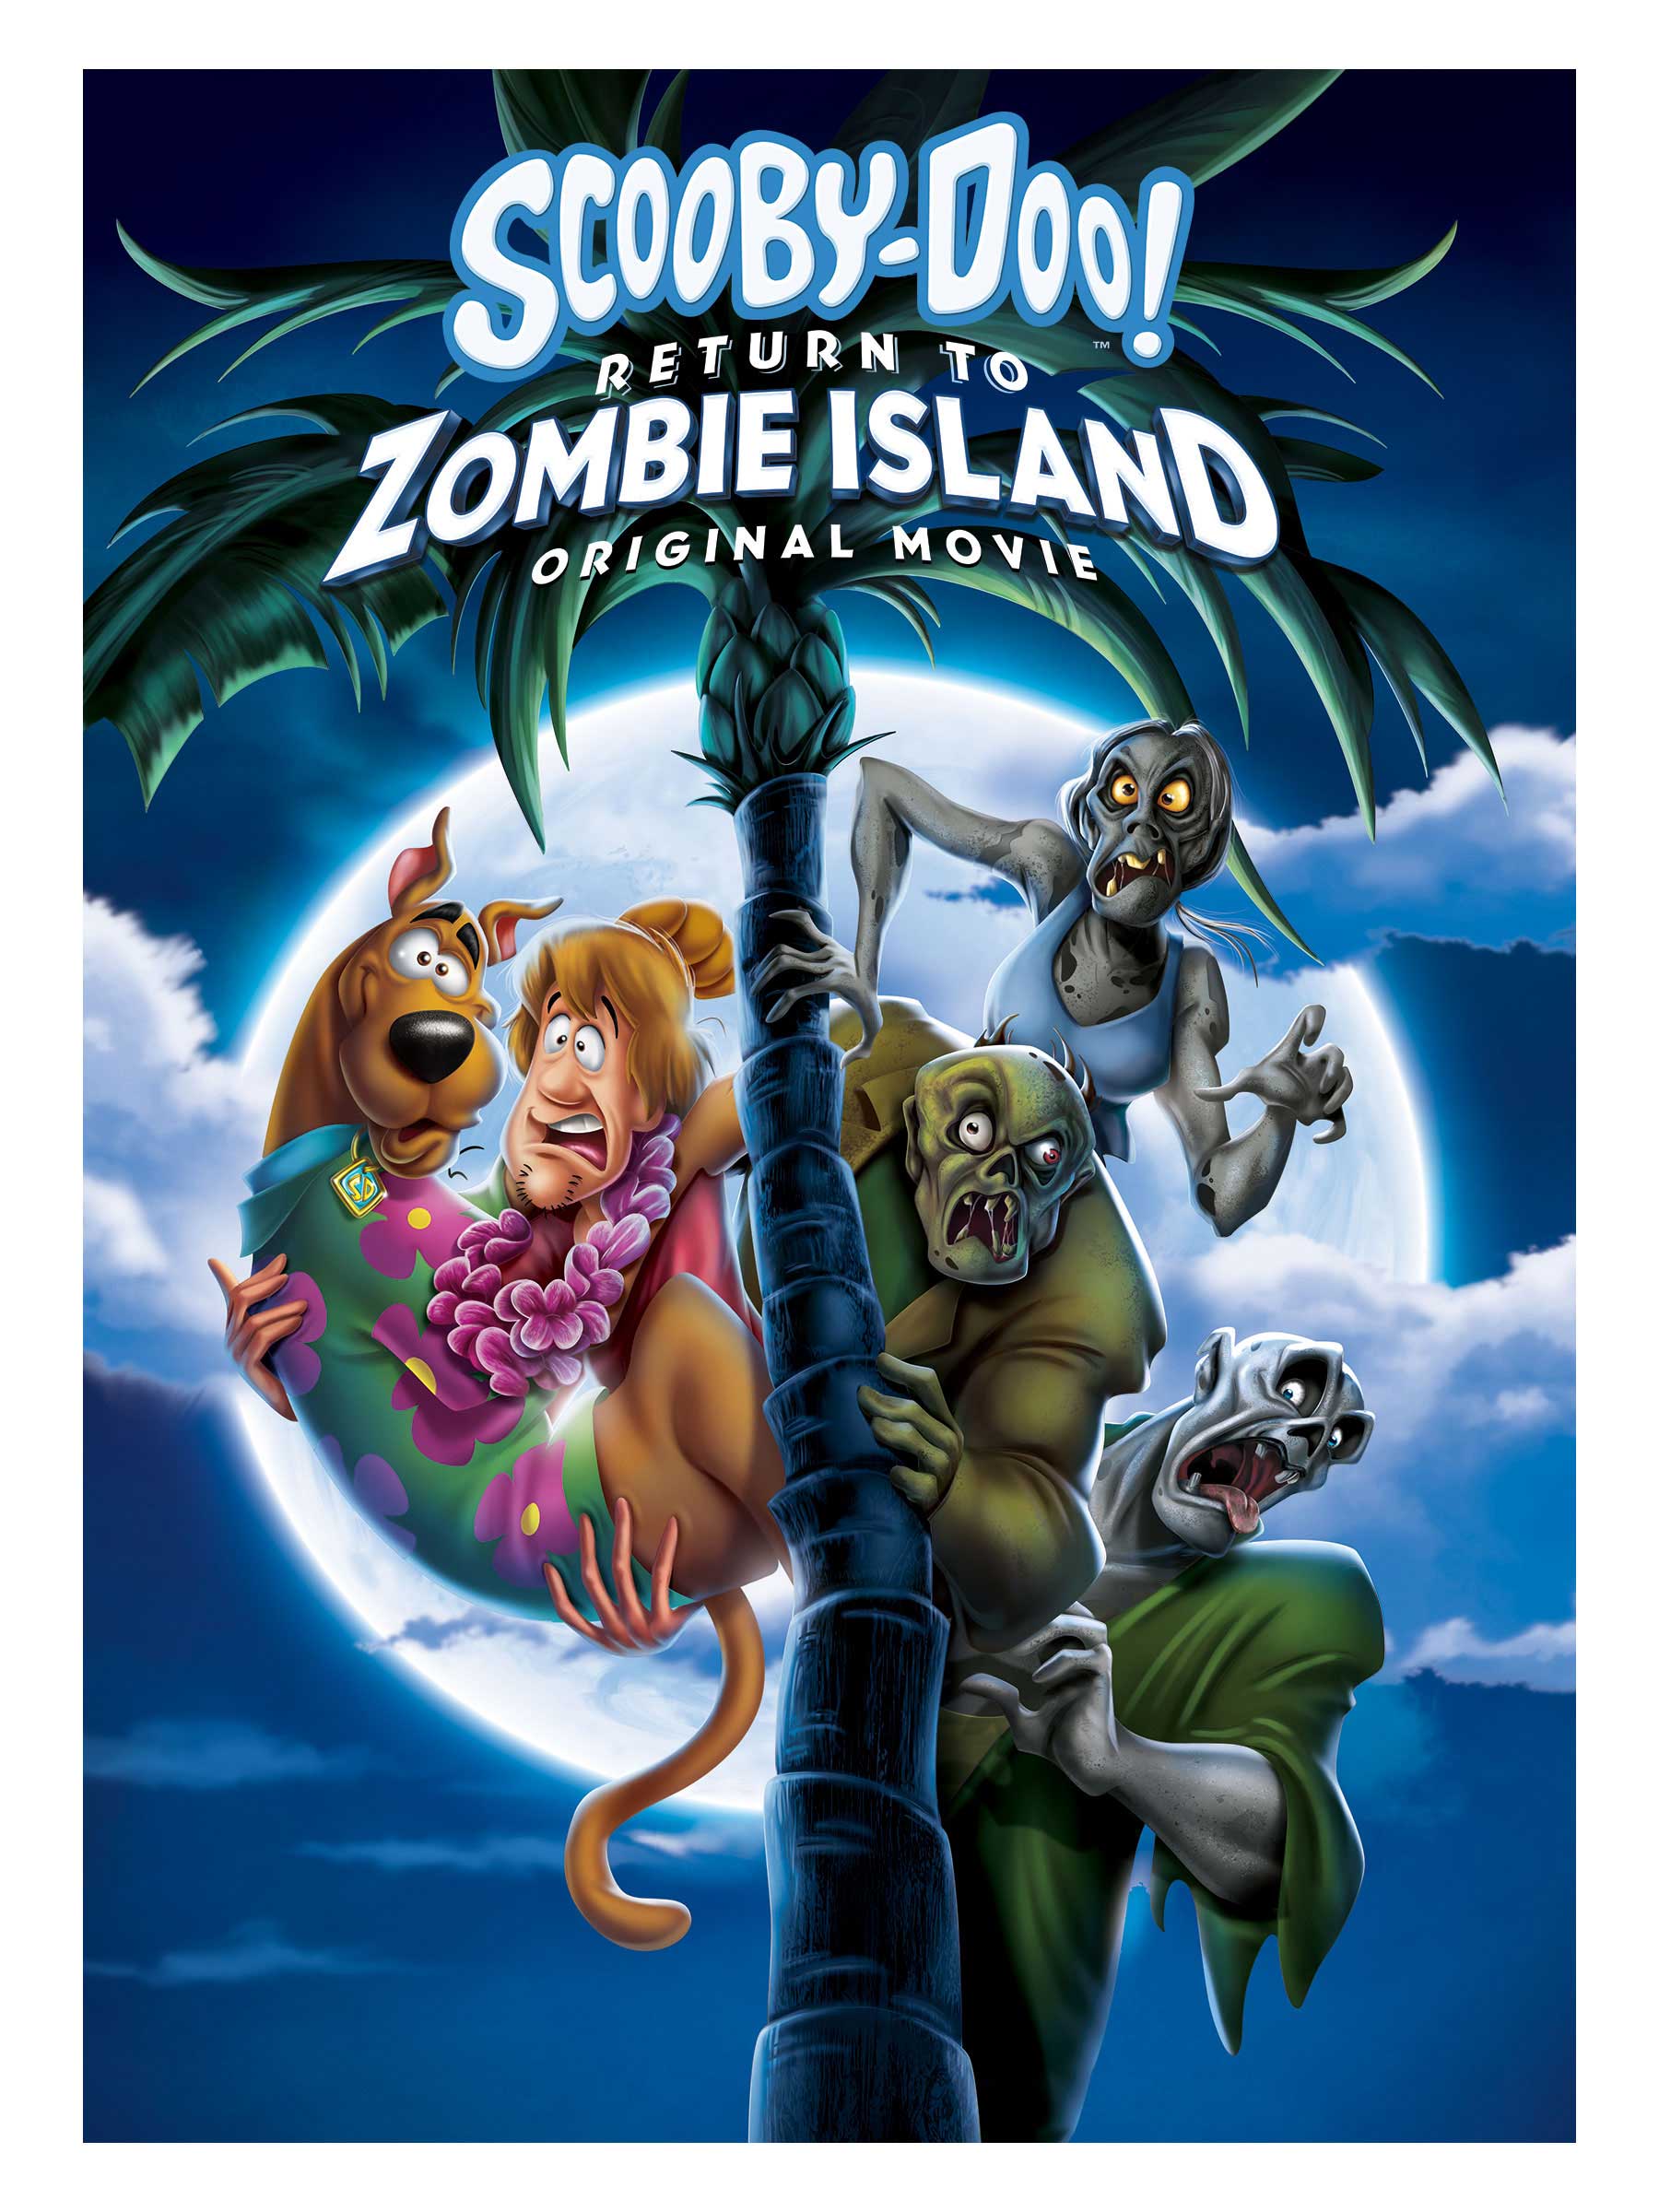 Scooby-Doo returns to Zombie Island in new animated feature film